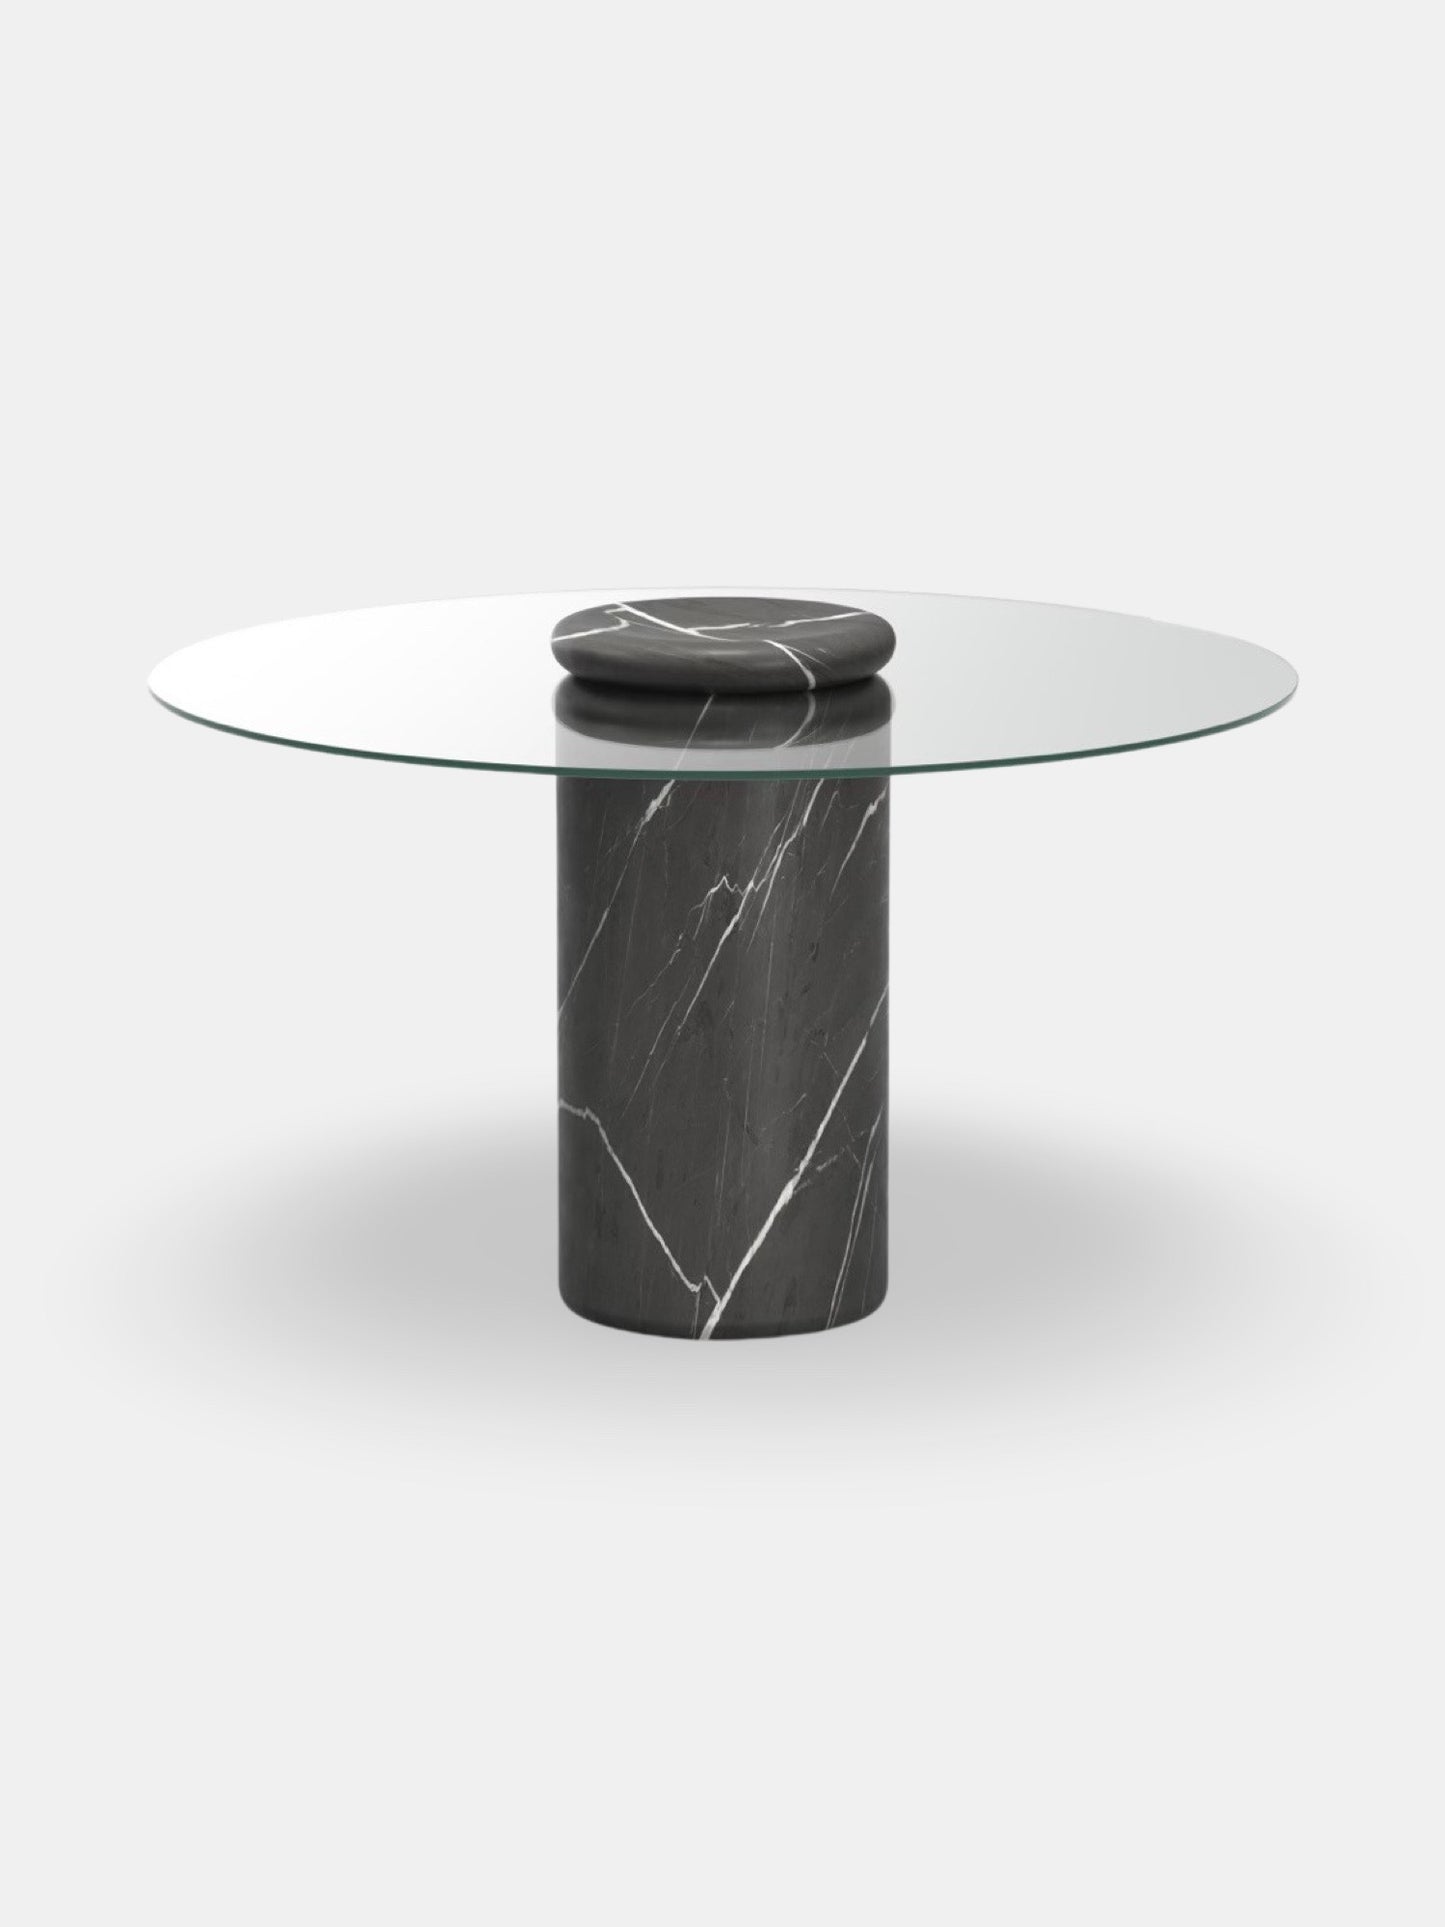 Castore Dining Table designed by Angelo Mangiarotti, 1975